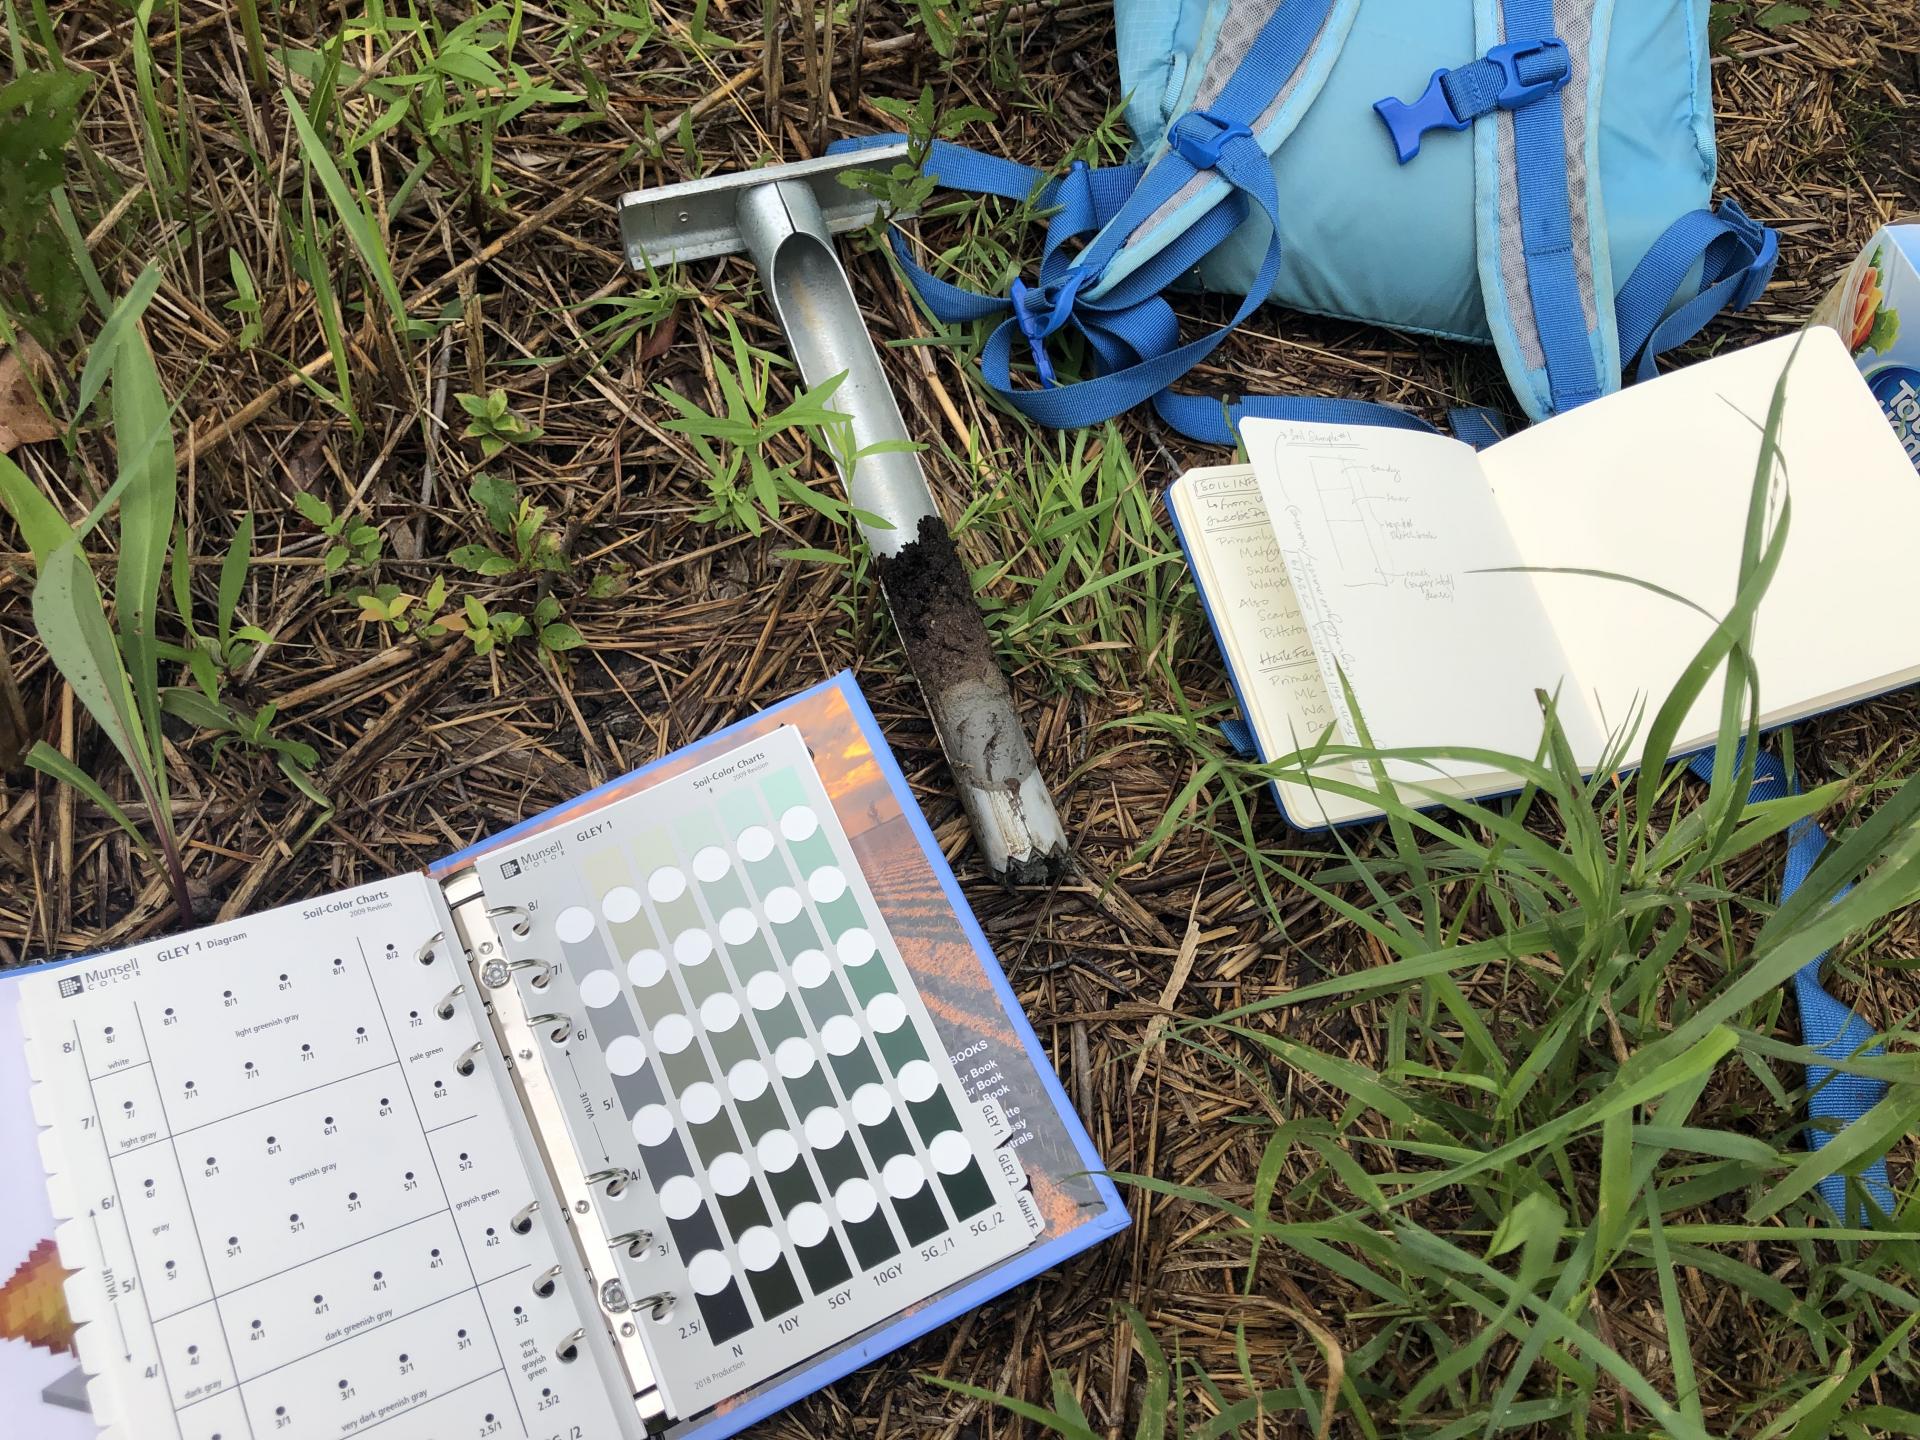 Soil research tools in the field